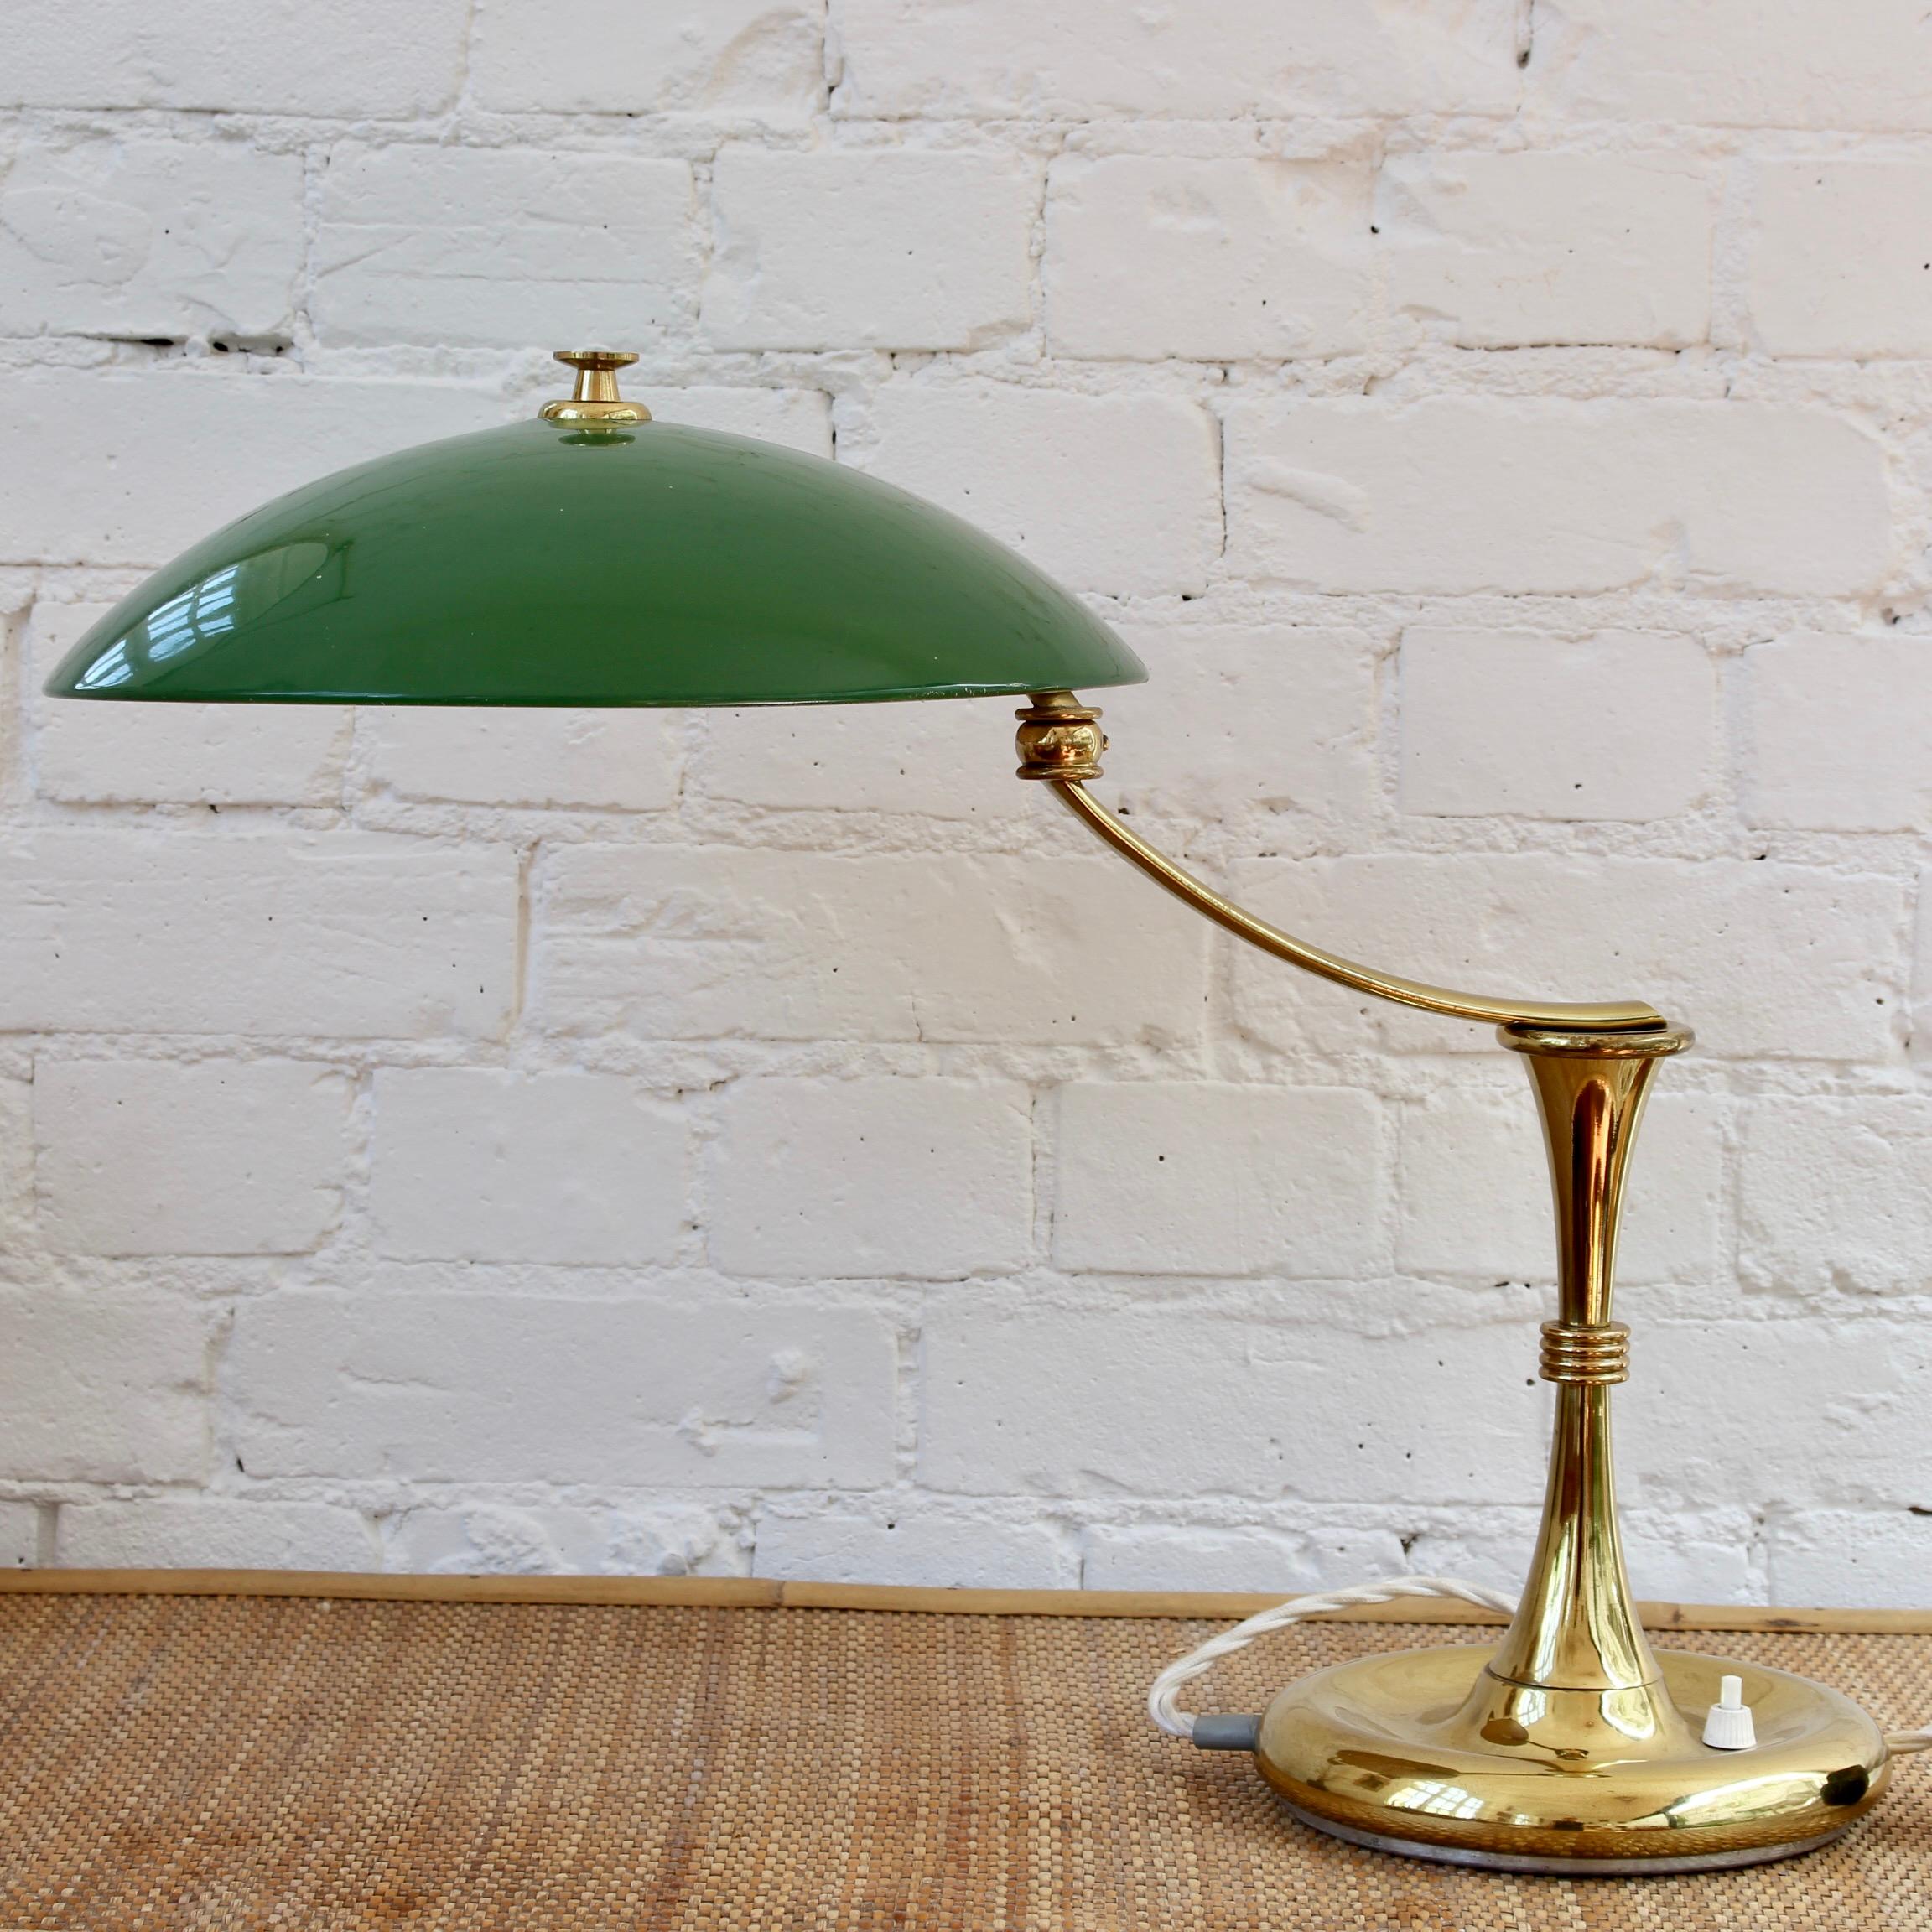 Mid-Century Modern Italian Mid-Century Brass-Covered Desk Lamp with Green Shade 'circa 1950s' For Sale